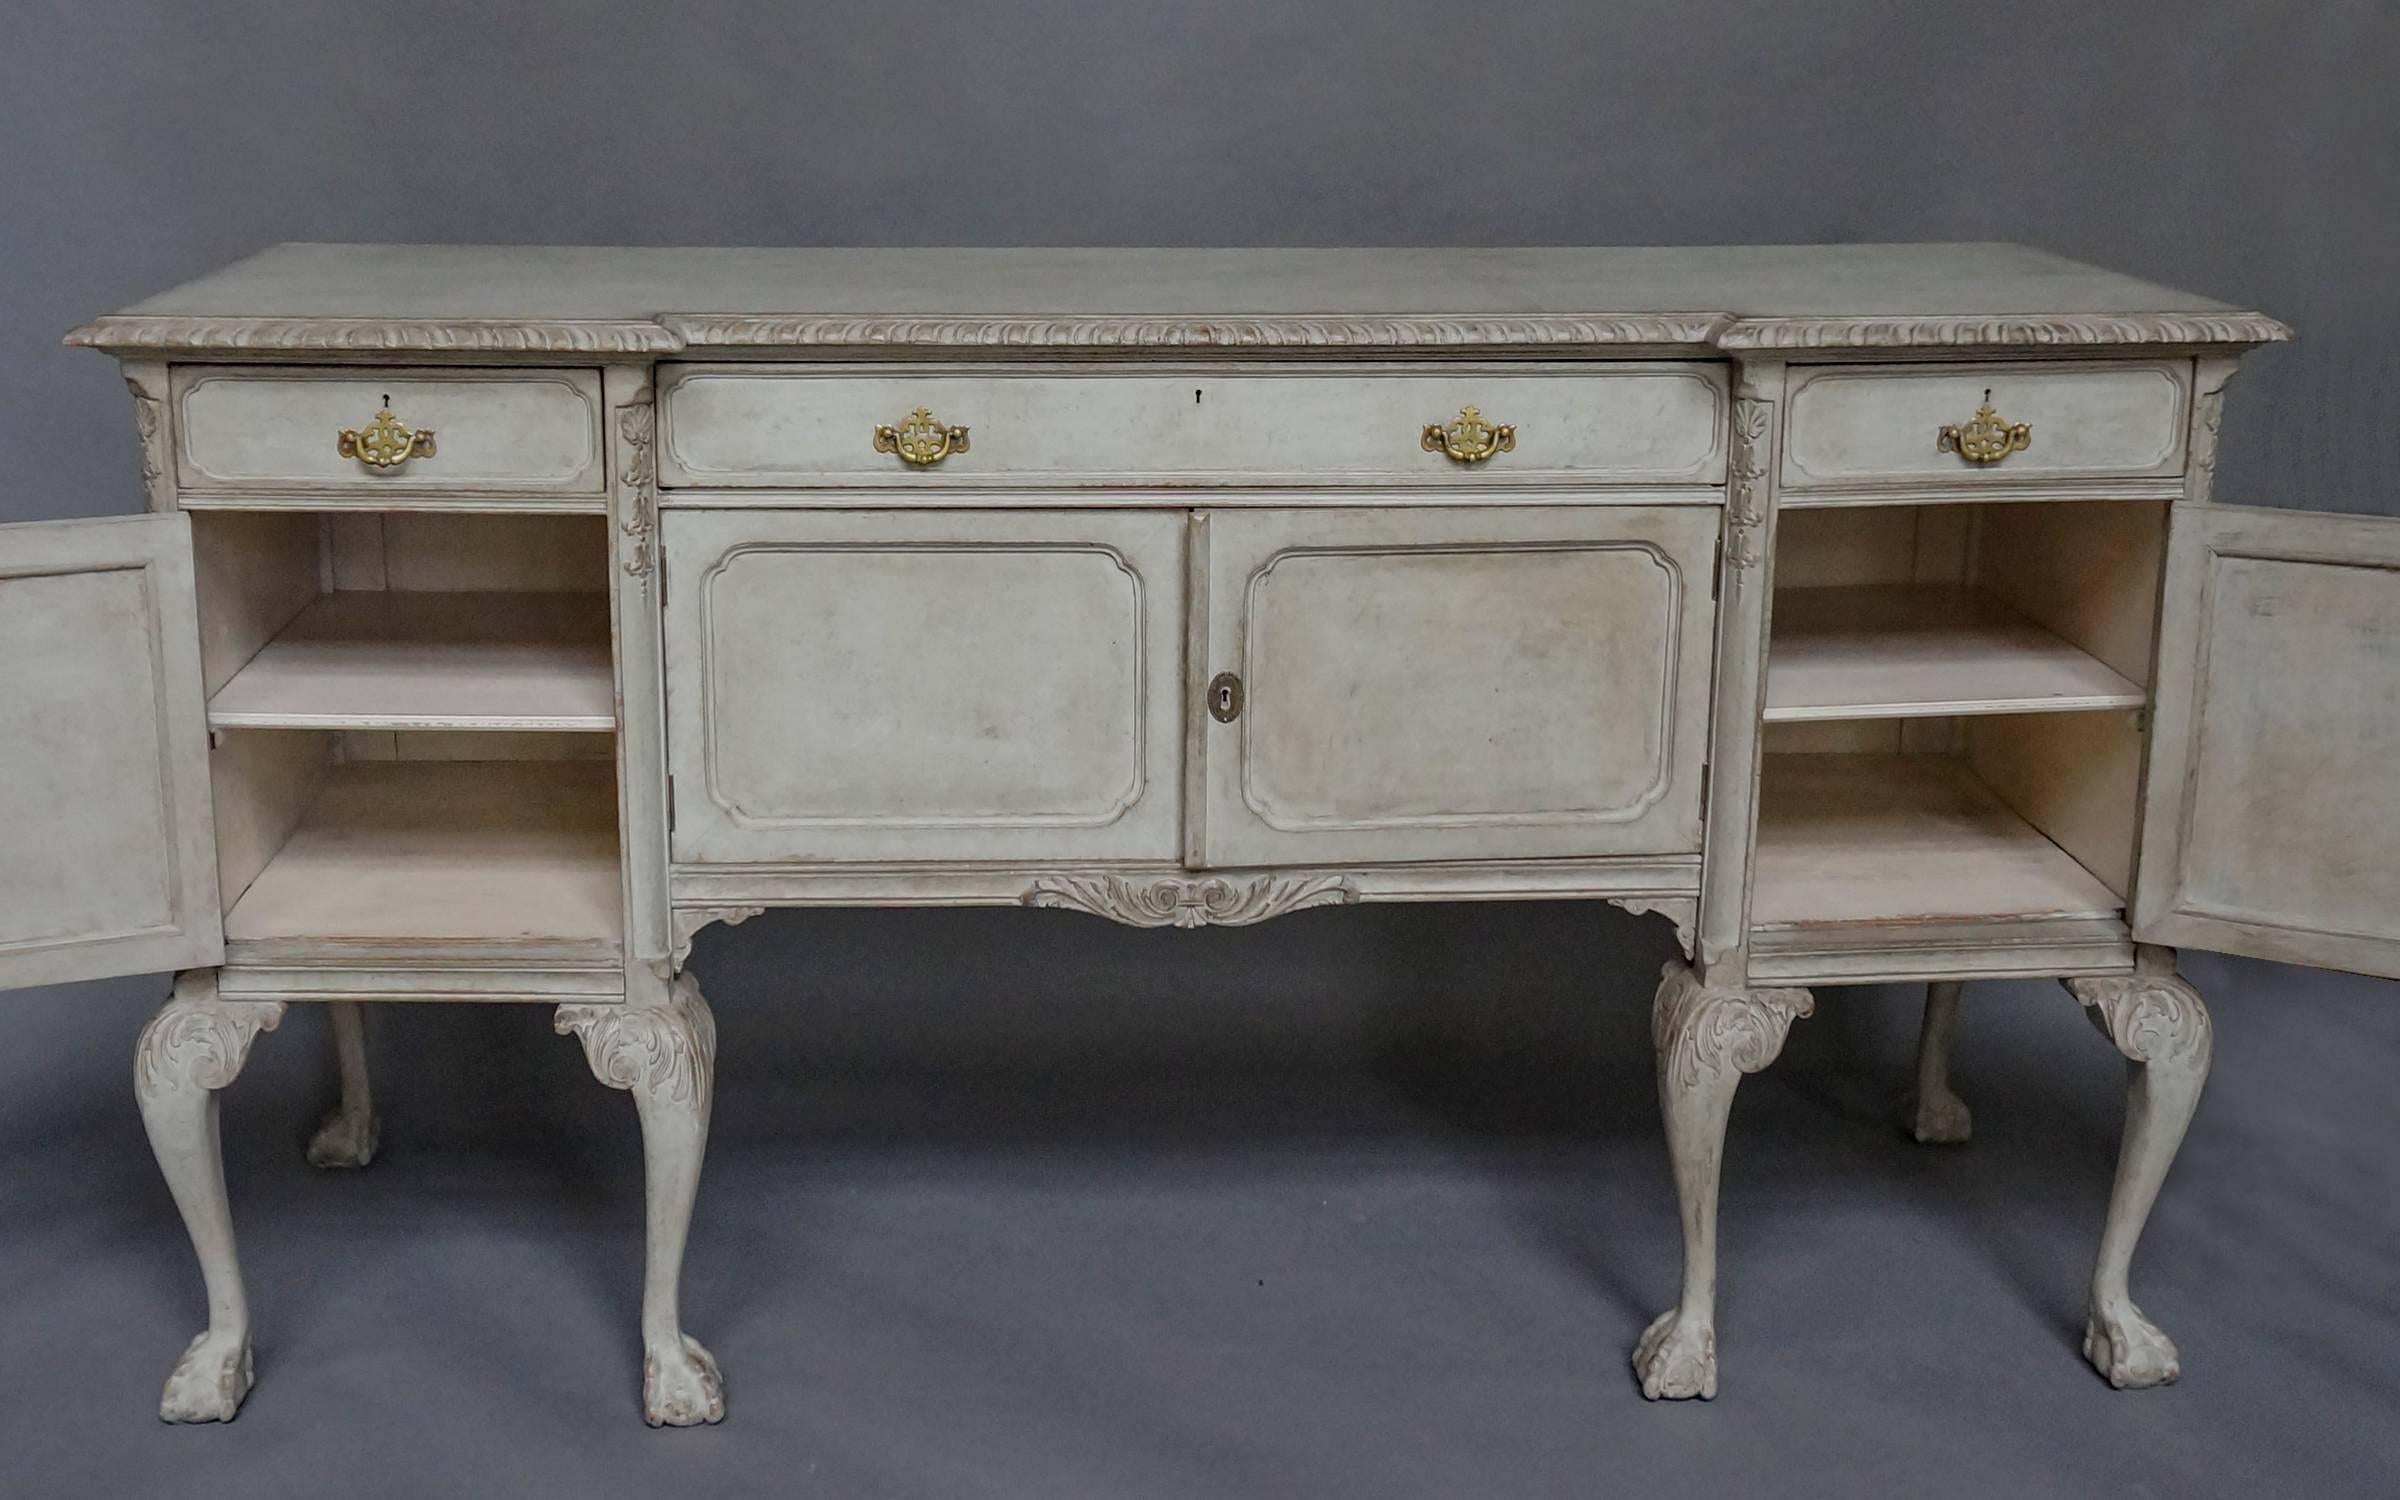 Swedish sideboard in the Rococo style, circa 1910, with four drawers and four doors. Nice carving under the shaped top and the apron. Canted corners with bellflower drops. Cabriole legs with foliate carving on the knees and ball and claw feet.